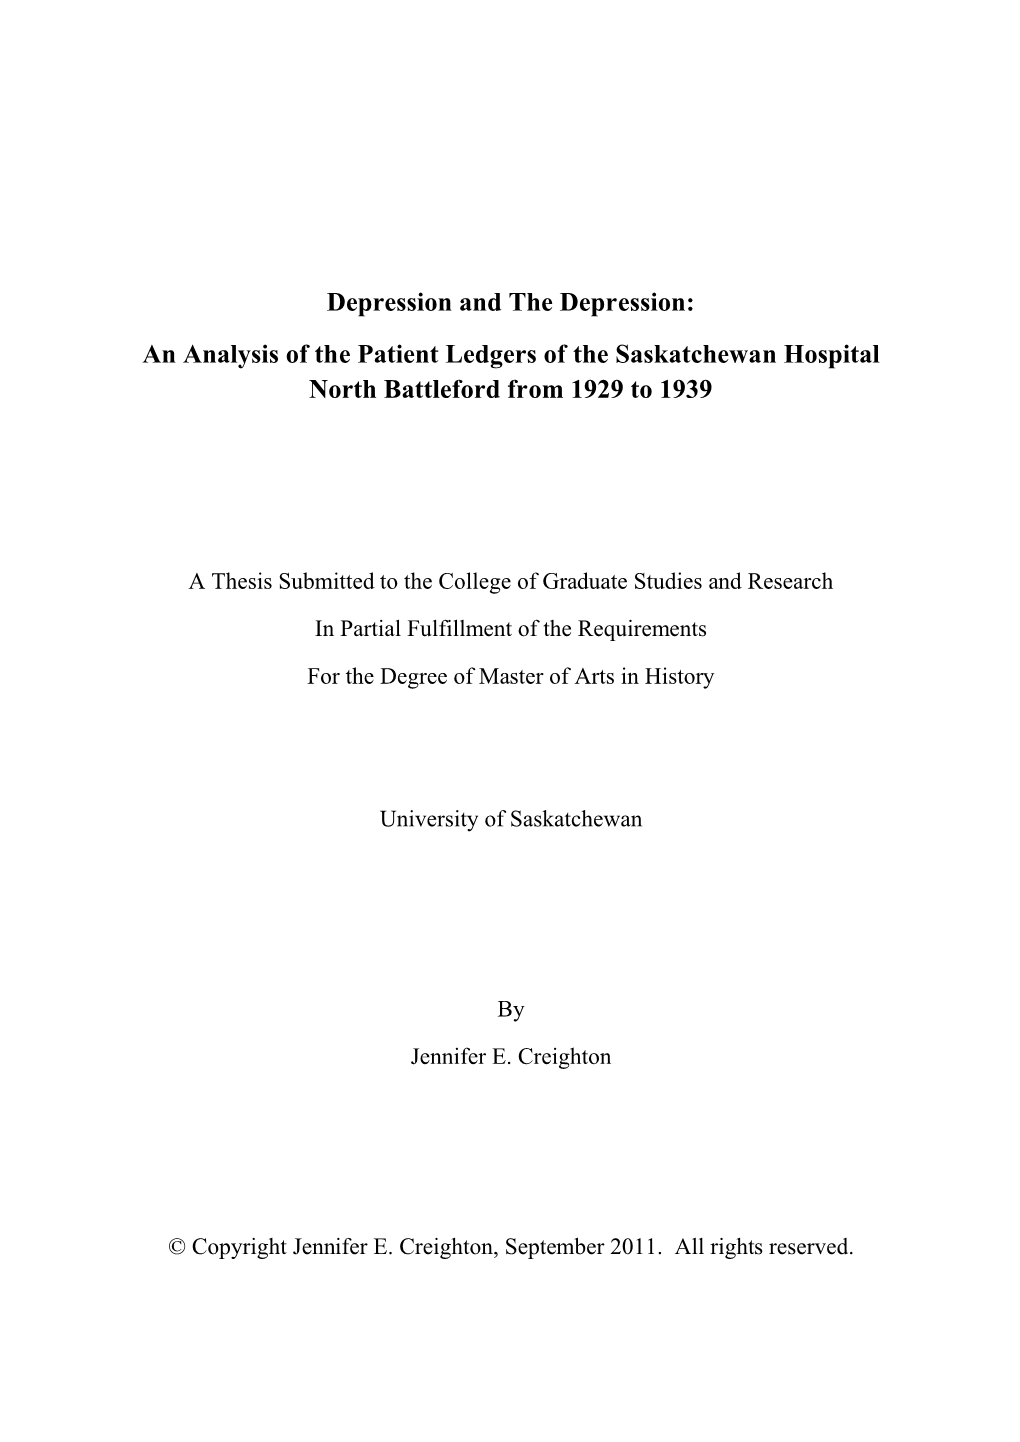 Depression and the Depression: an Analysis of the Patient Ledgers of the Saskatchewan Hospital North Battleford from 1929 to 1939